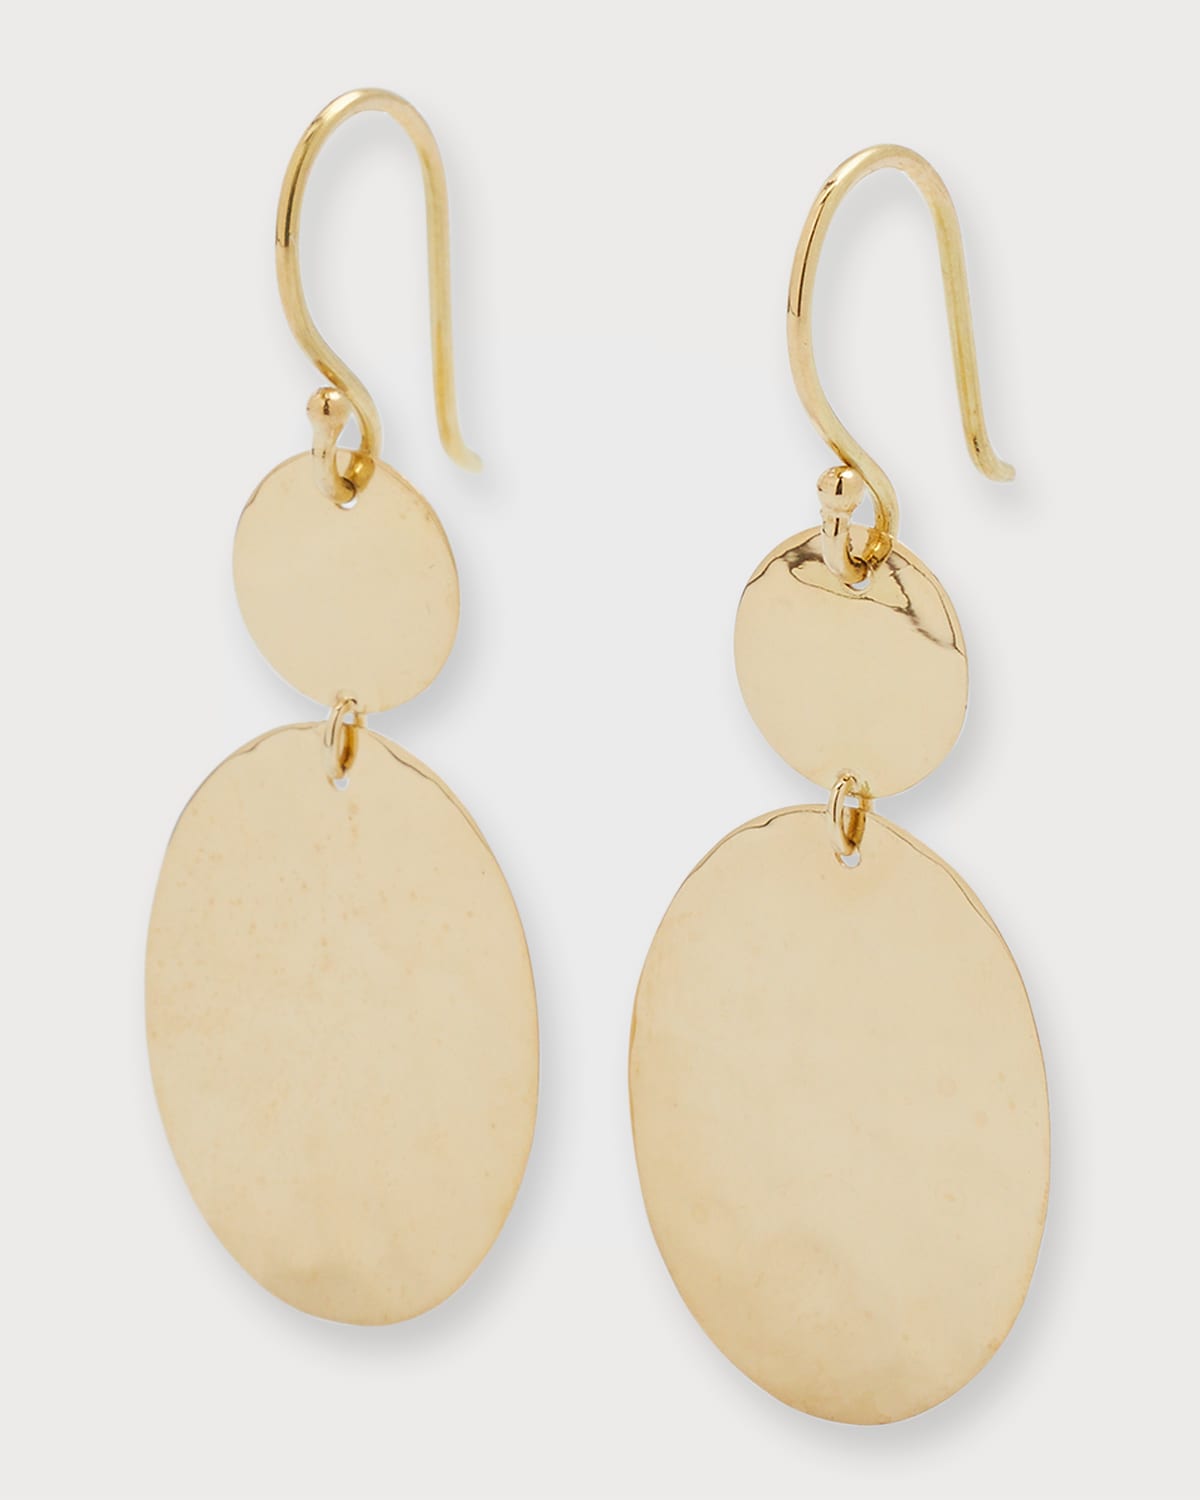 Ippolita Classico Crinkle Hammered Circle Oval Drop Earrings in 18K Gold